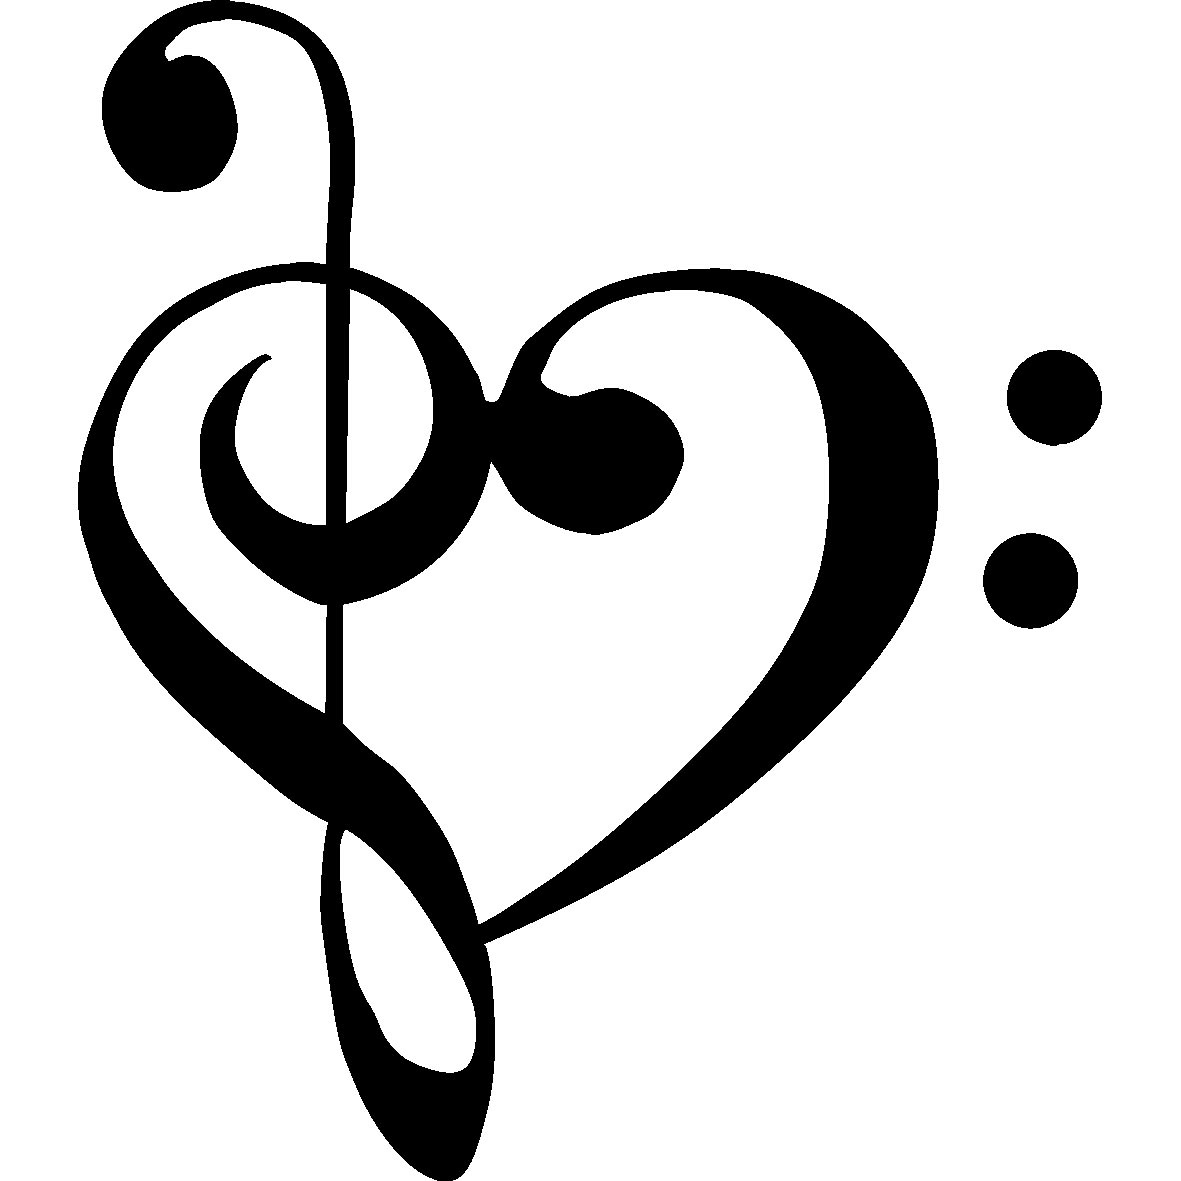 Bass Clef Treble Clef Heart | Free Images - vector ...